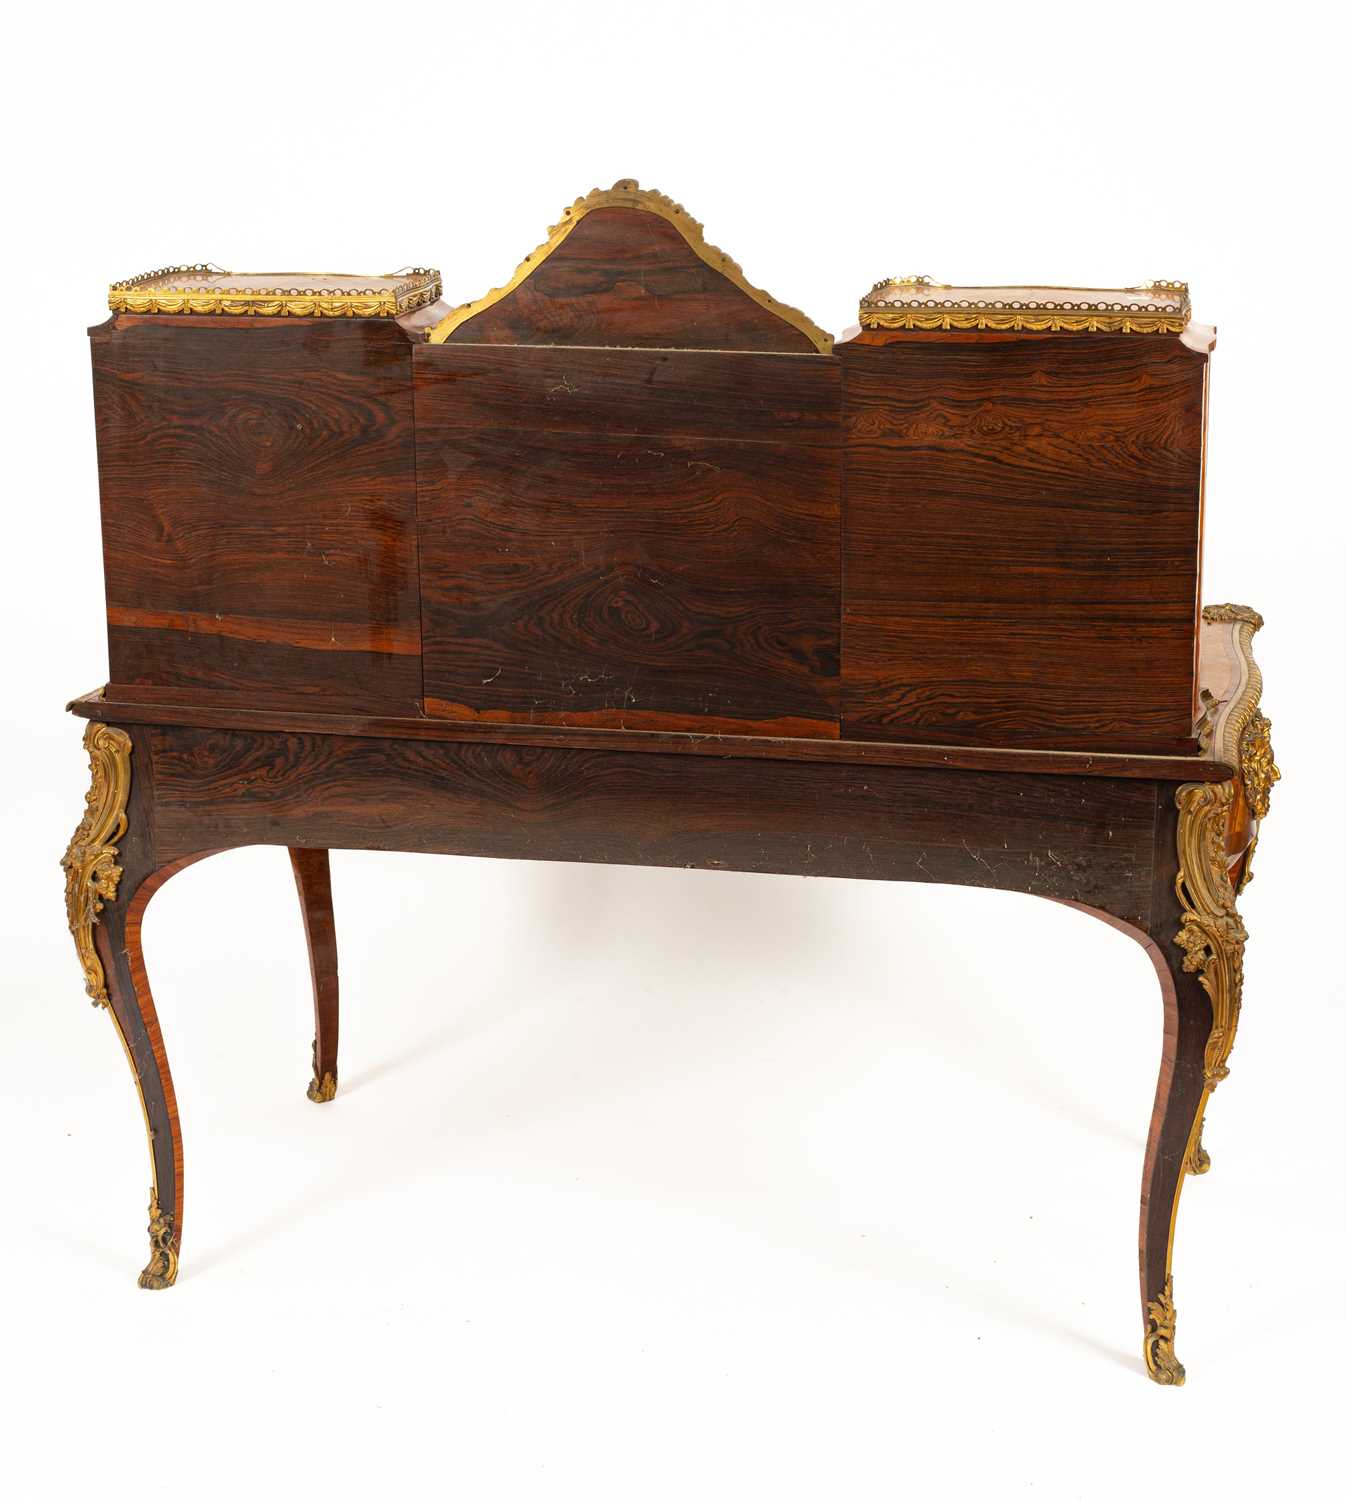 A Victorian ormolu mounted tulipwood and kingwood desk in the Louis XV style - Image 7 of 38